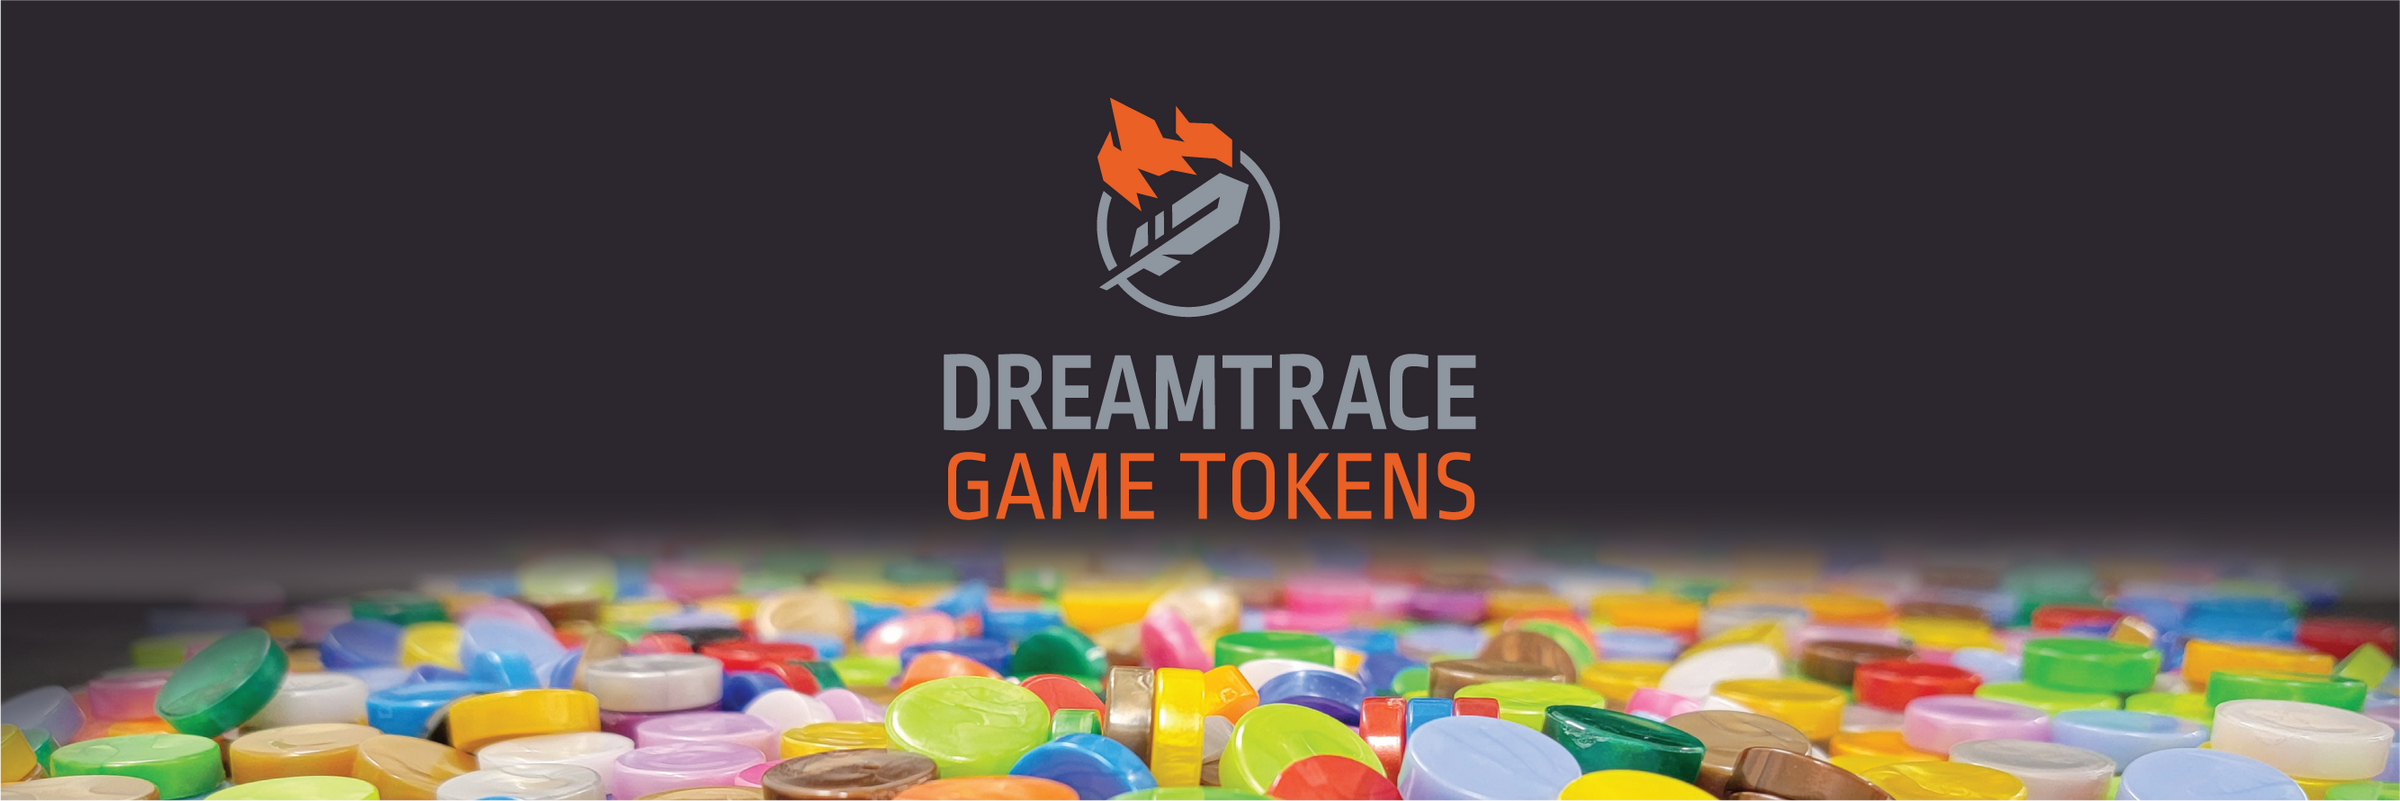 DreamTrace Game Tokens